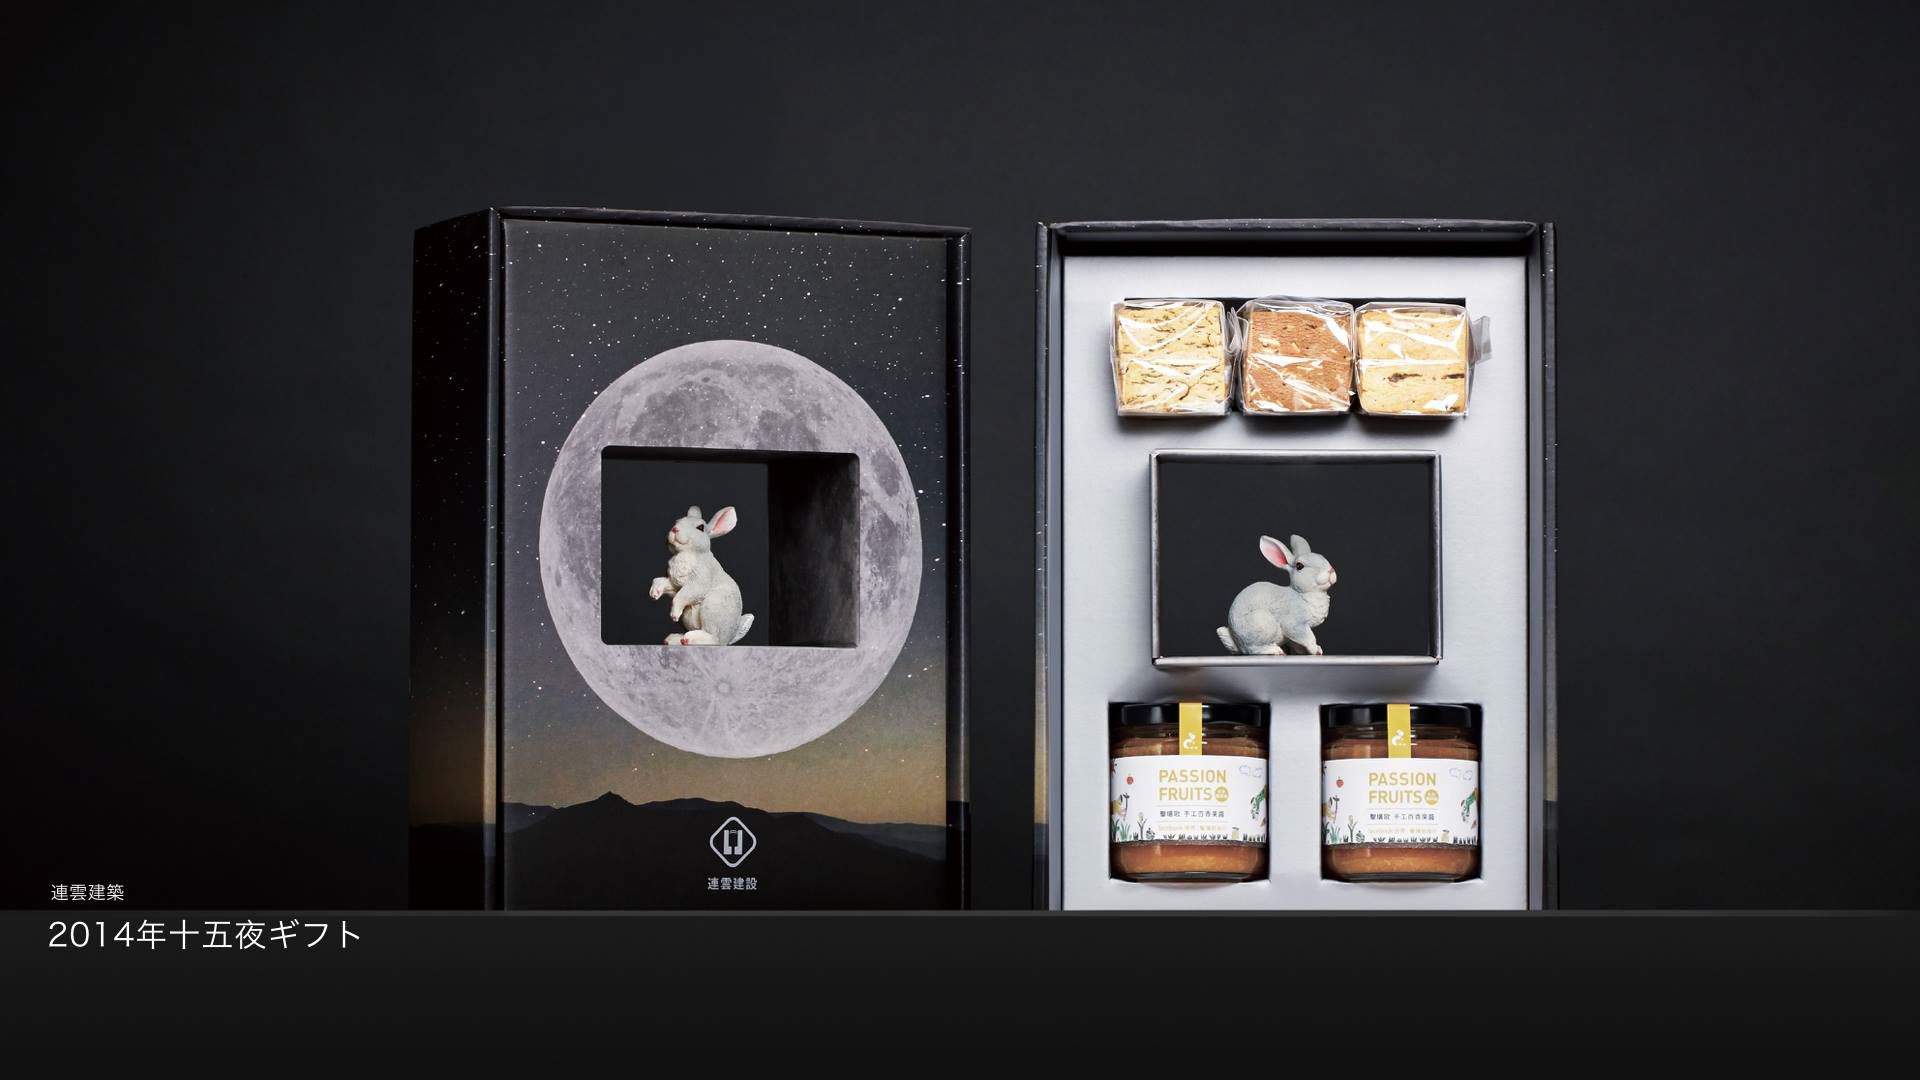 14 Moon Festival Gift For Lien Yun 連雲建築中秋賀禮包裝on Behance